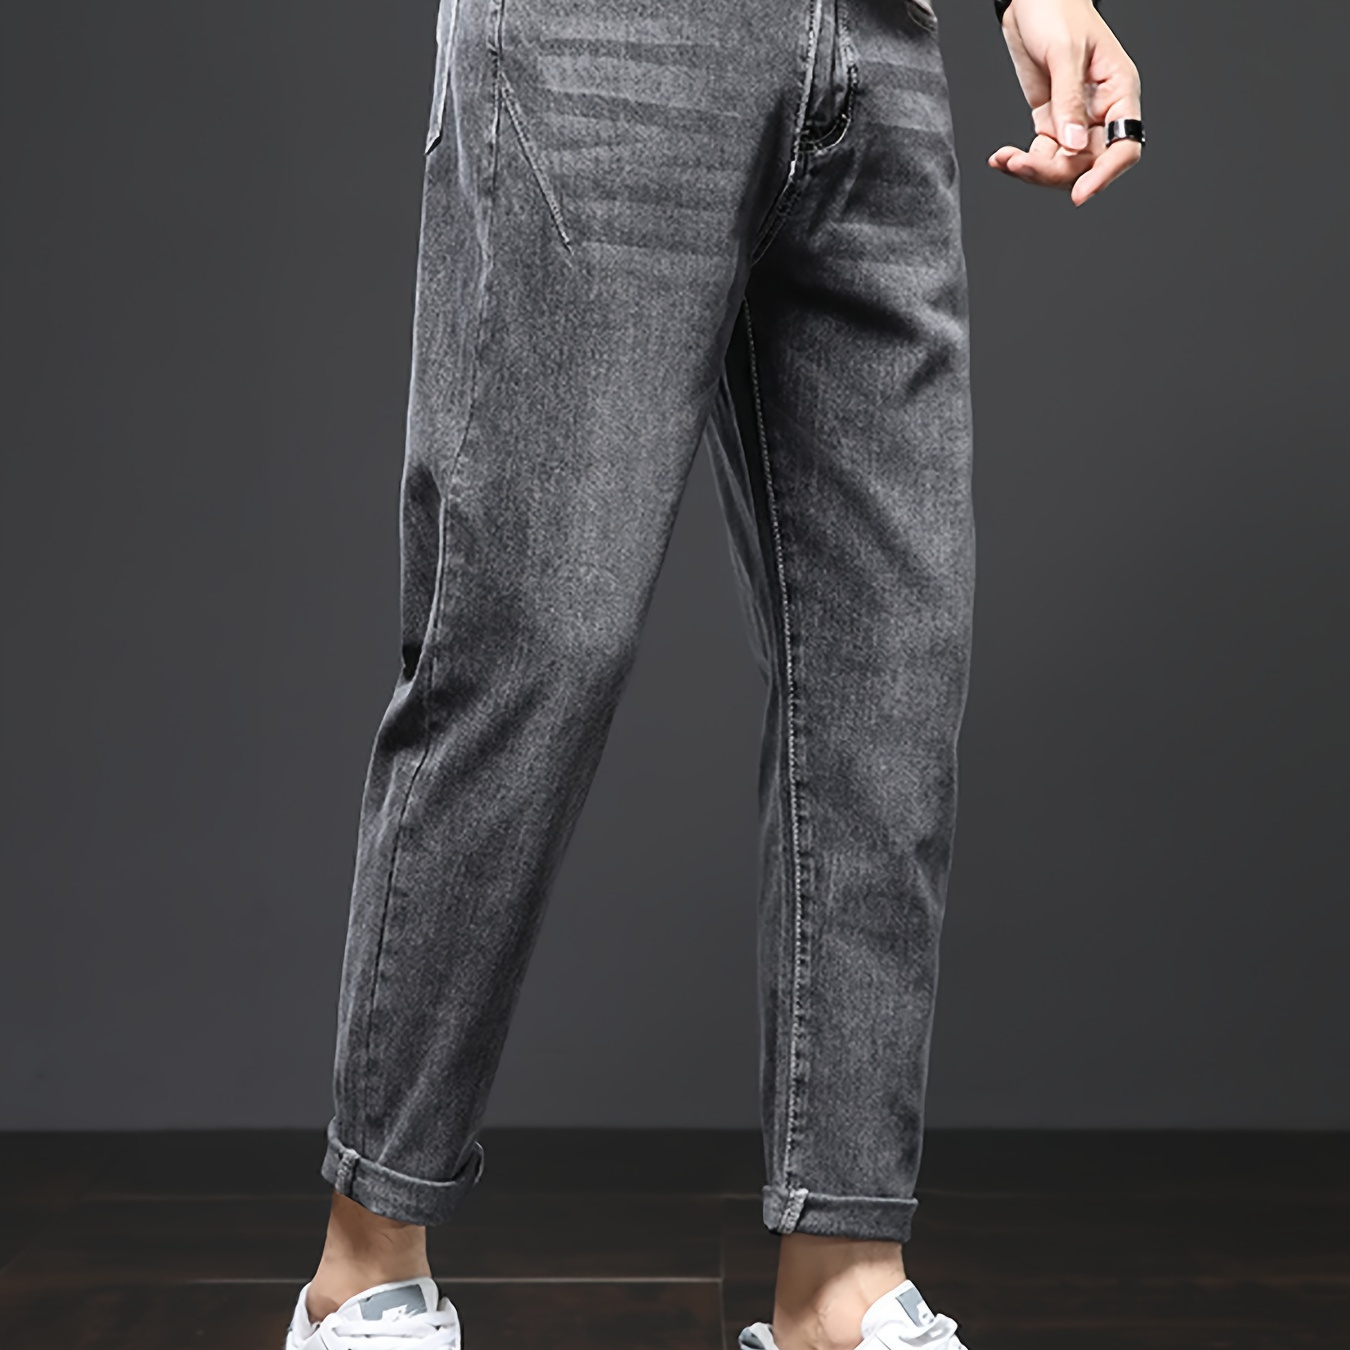 

Men's Solid Washed Denim Trousers With Pockets, Causal Cotton Blend Cropped Jeans For Outdoor Activities